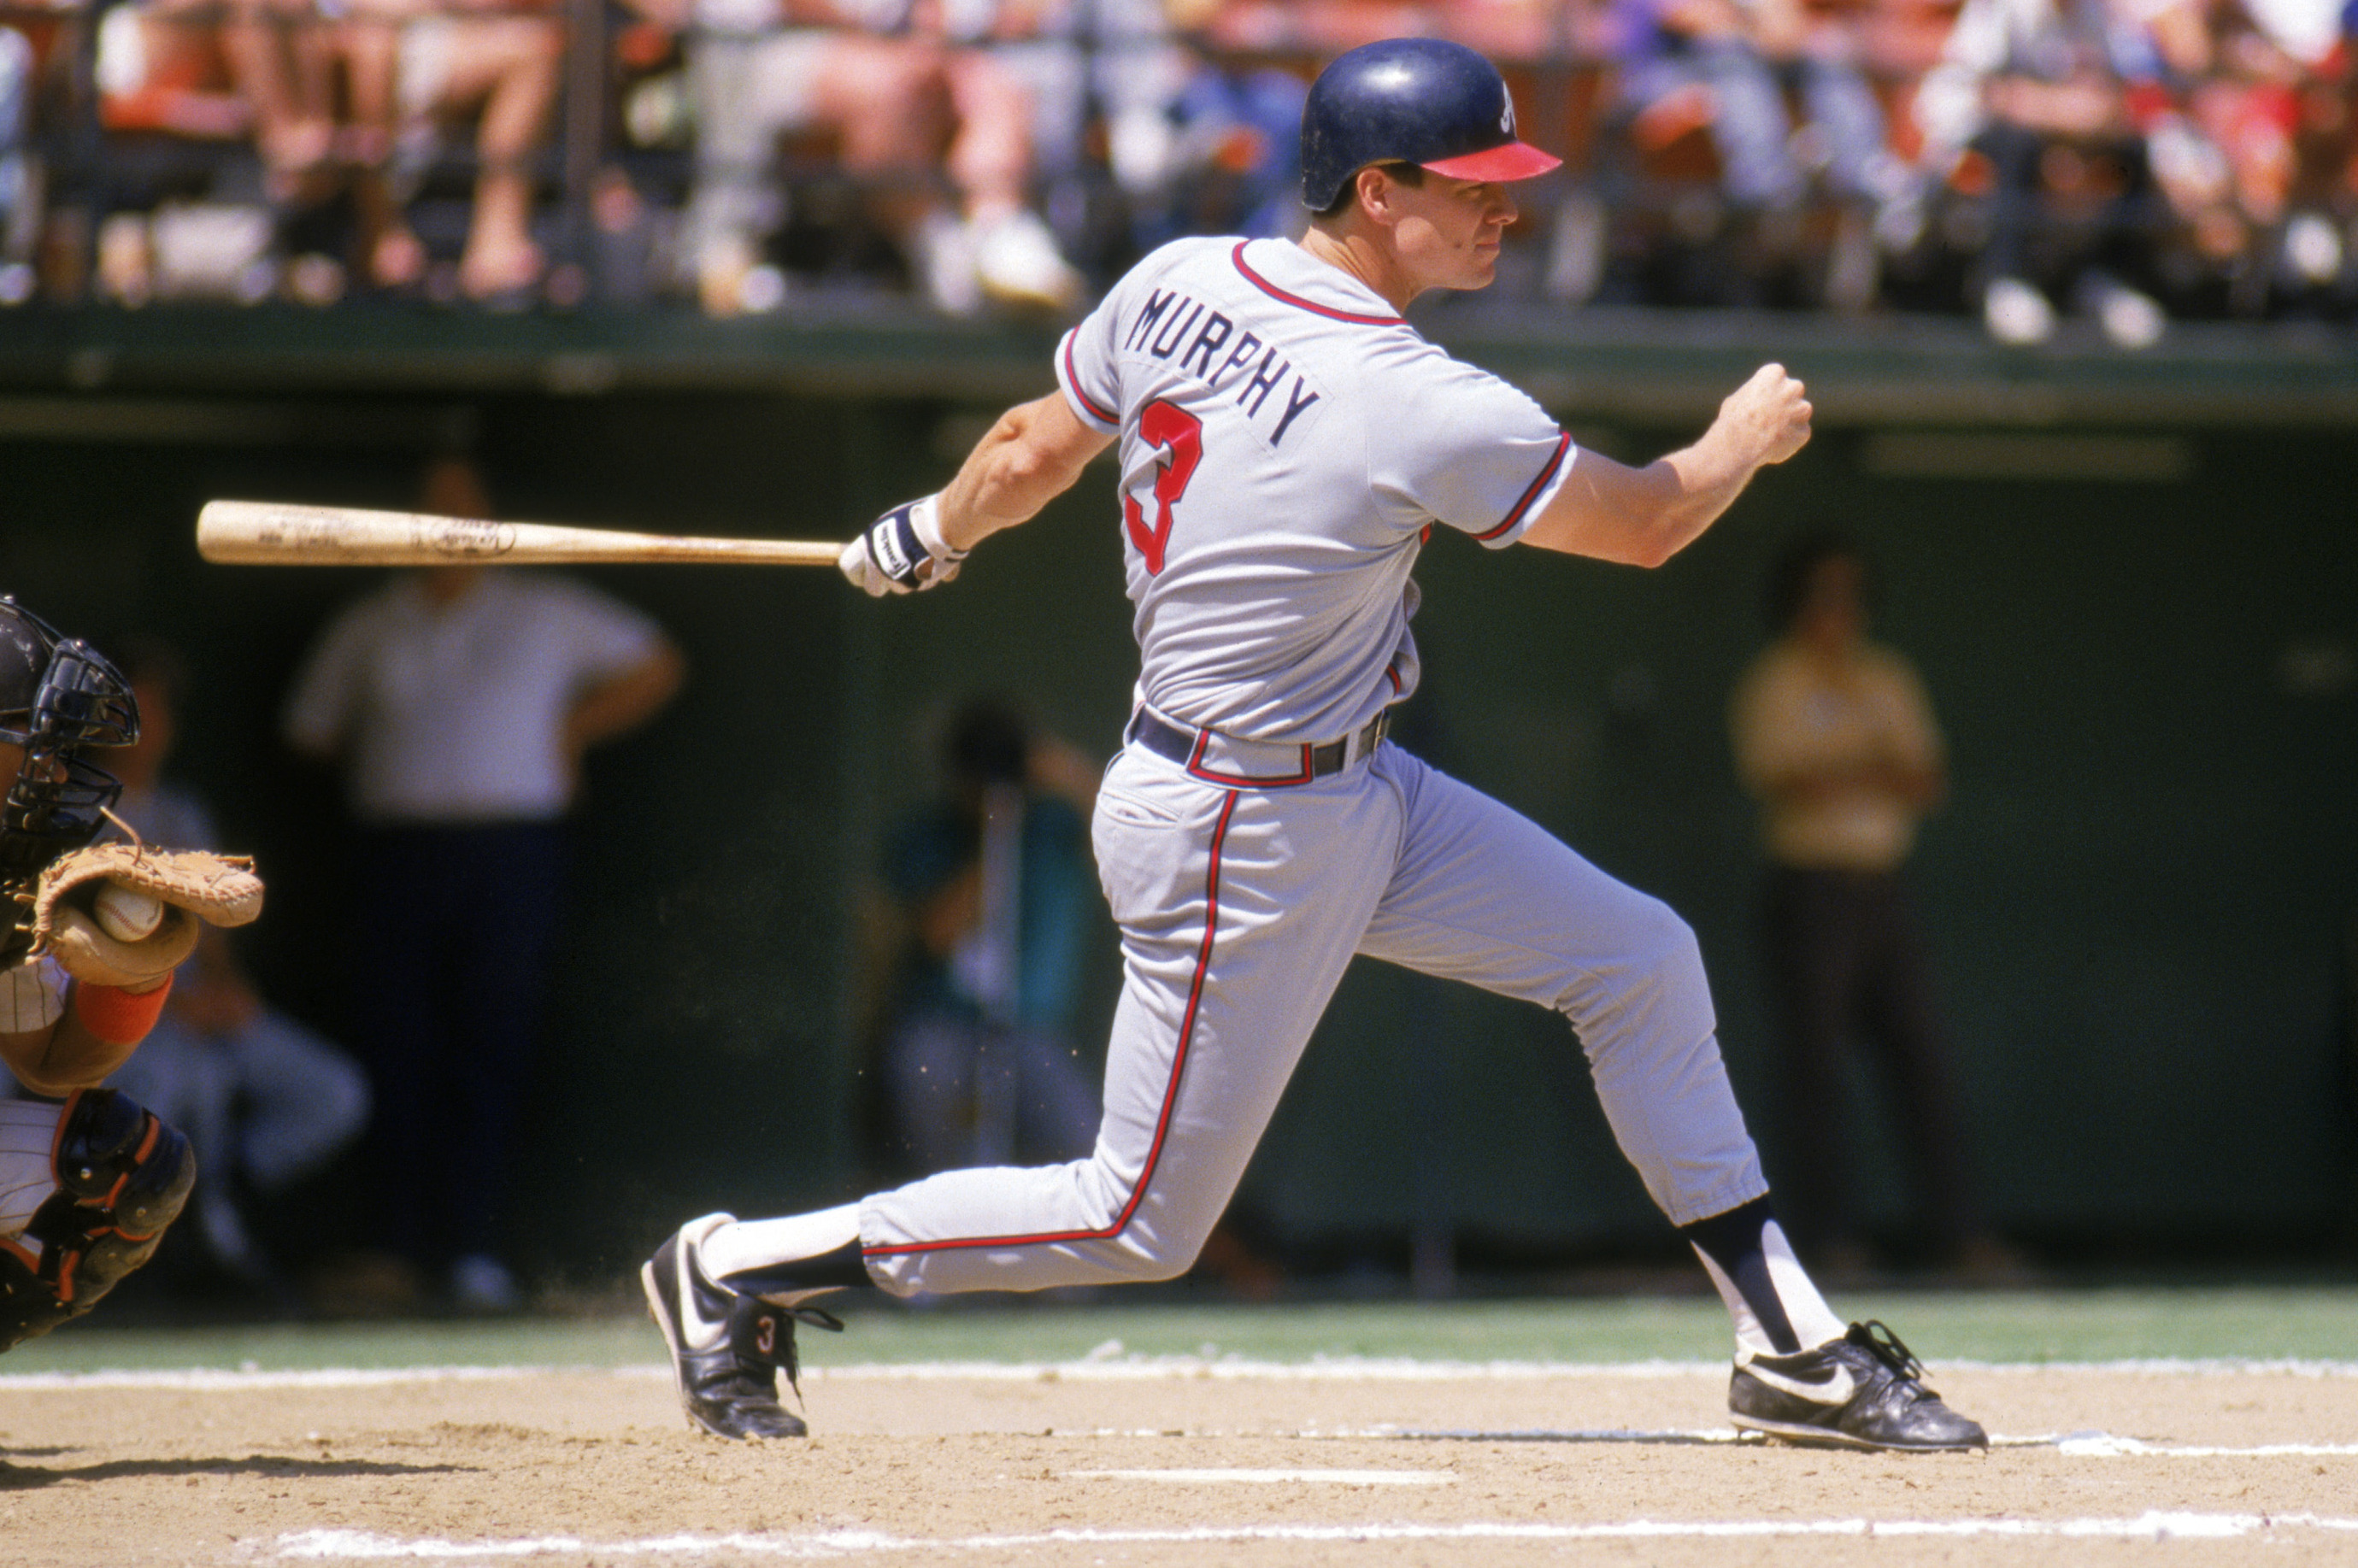 Should Braves star Dale Murphy be picked for Hall of Fame?